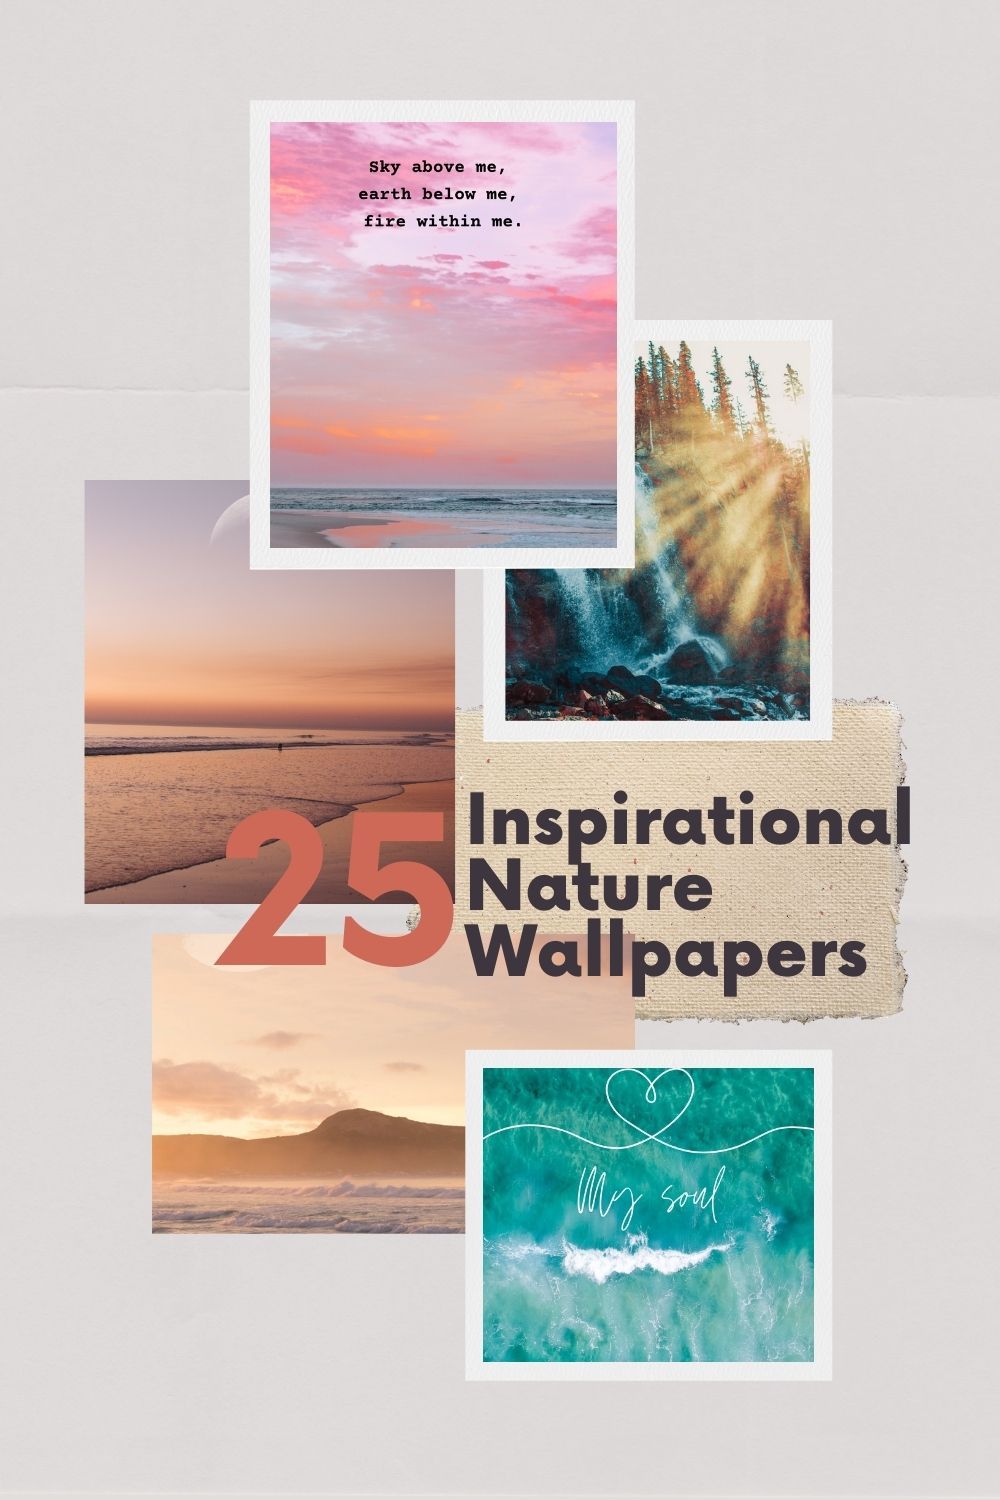 25 inspirational nature wallpapers to inspire you - Earth